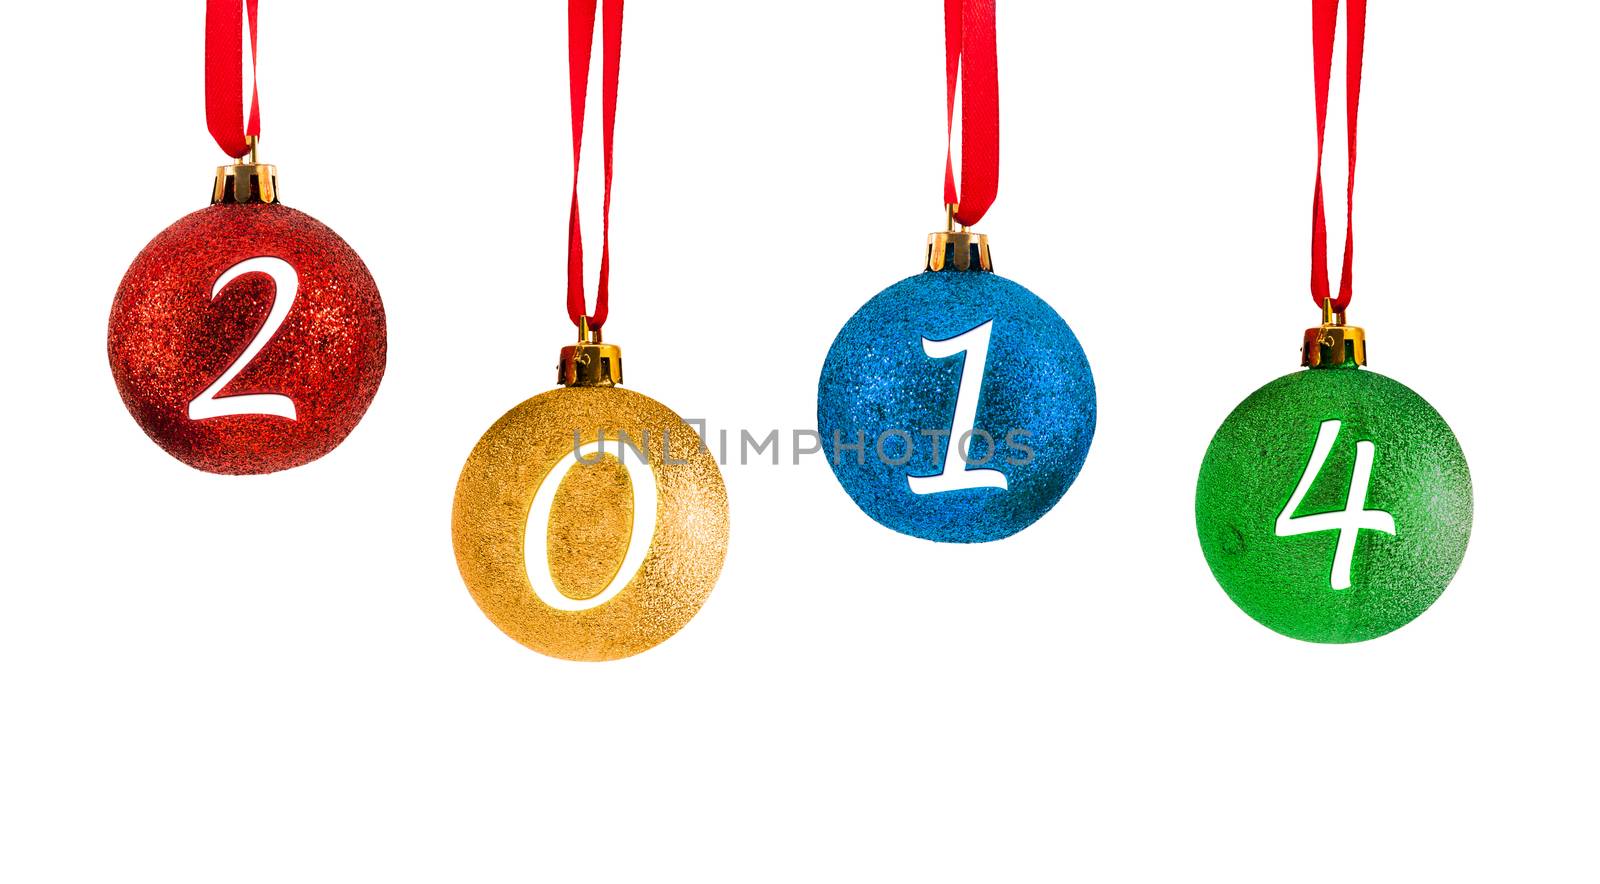 New Year 2014 Christmas balls isolated over white background with clipping path.